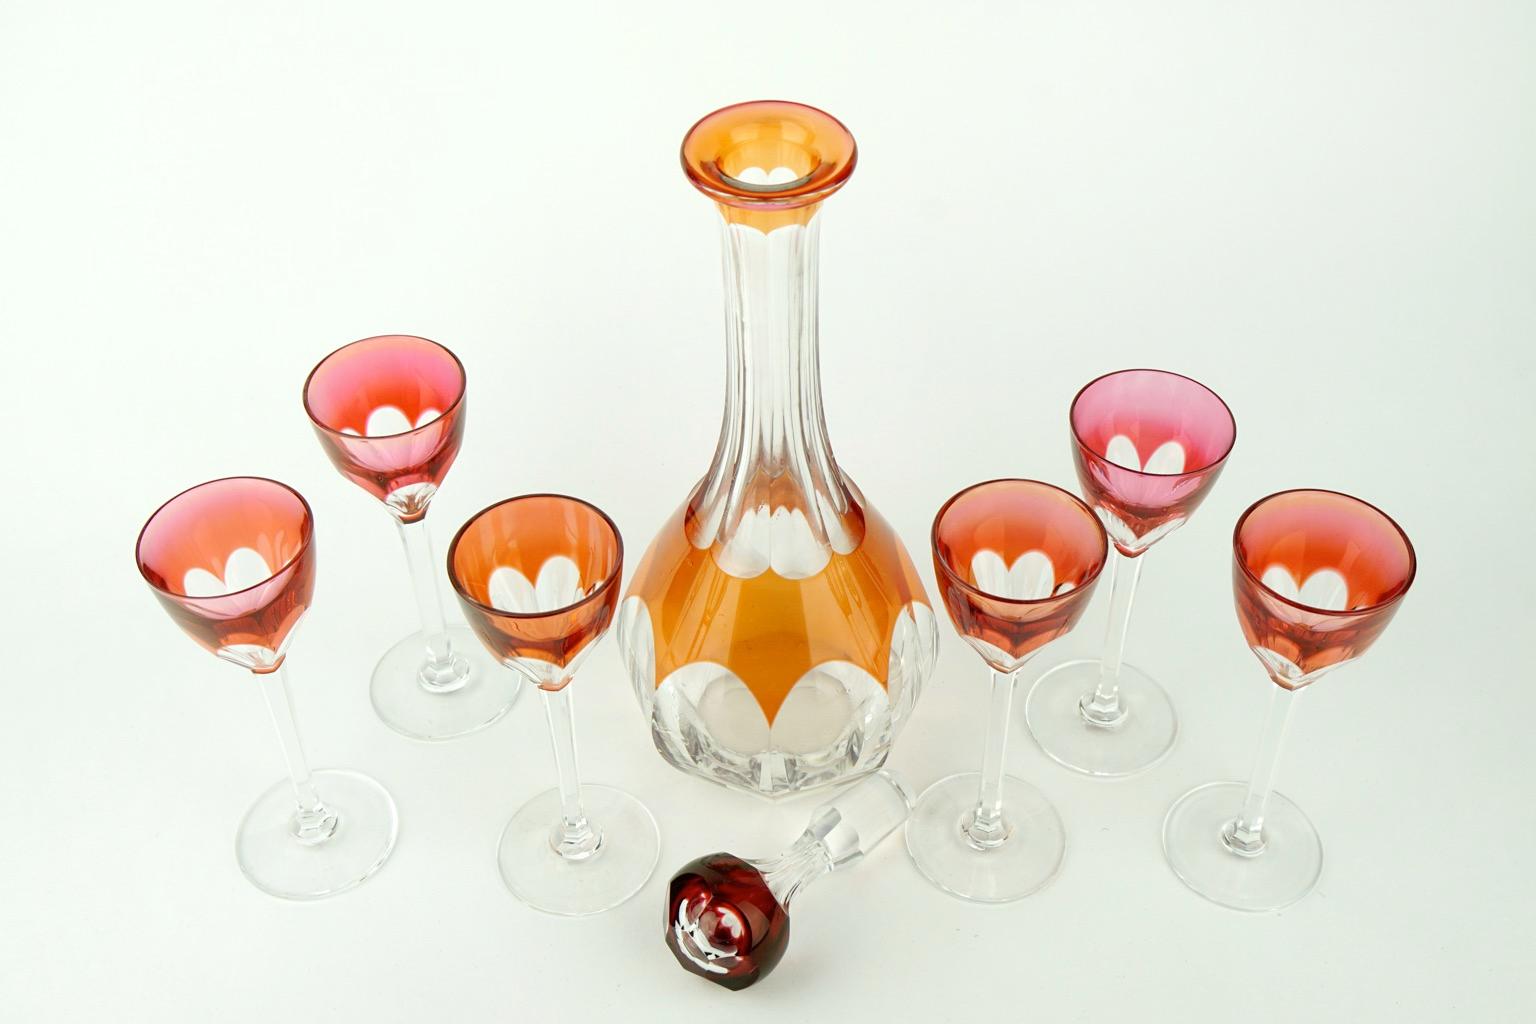 One decanter set with six glasses in very good condition. Original stopper.
Measures: Decanter, height 28 cm, diameter 9 cm.
Eight glasses, height 12.8 cm, diameter 4.5 cm.